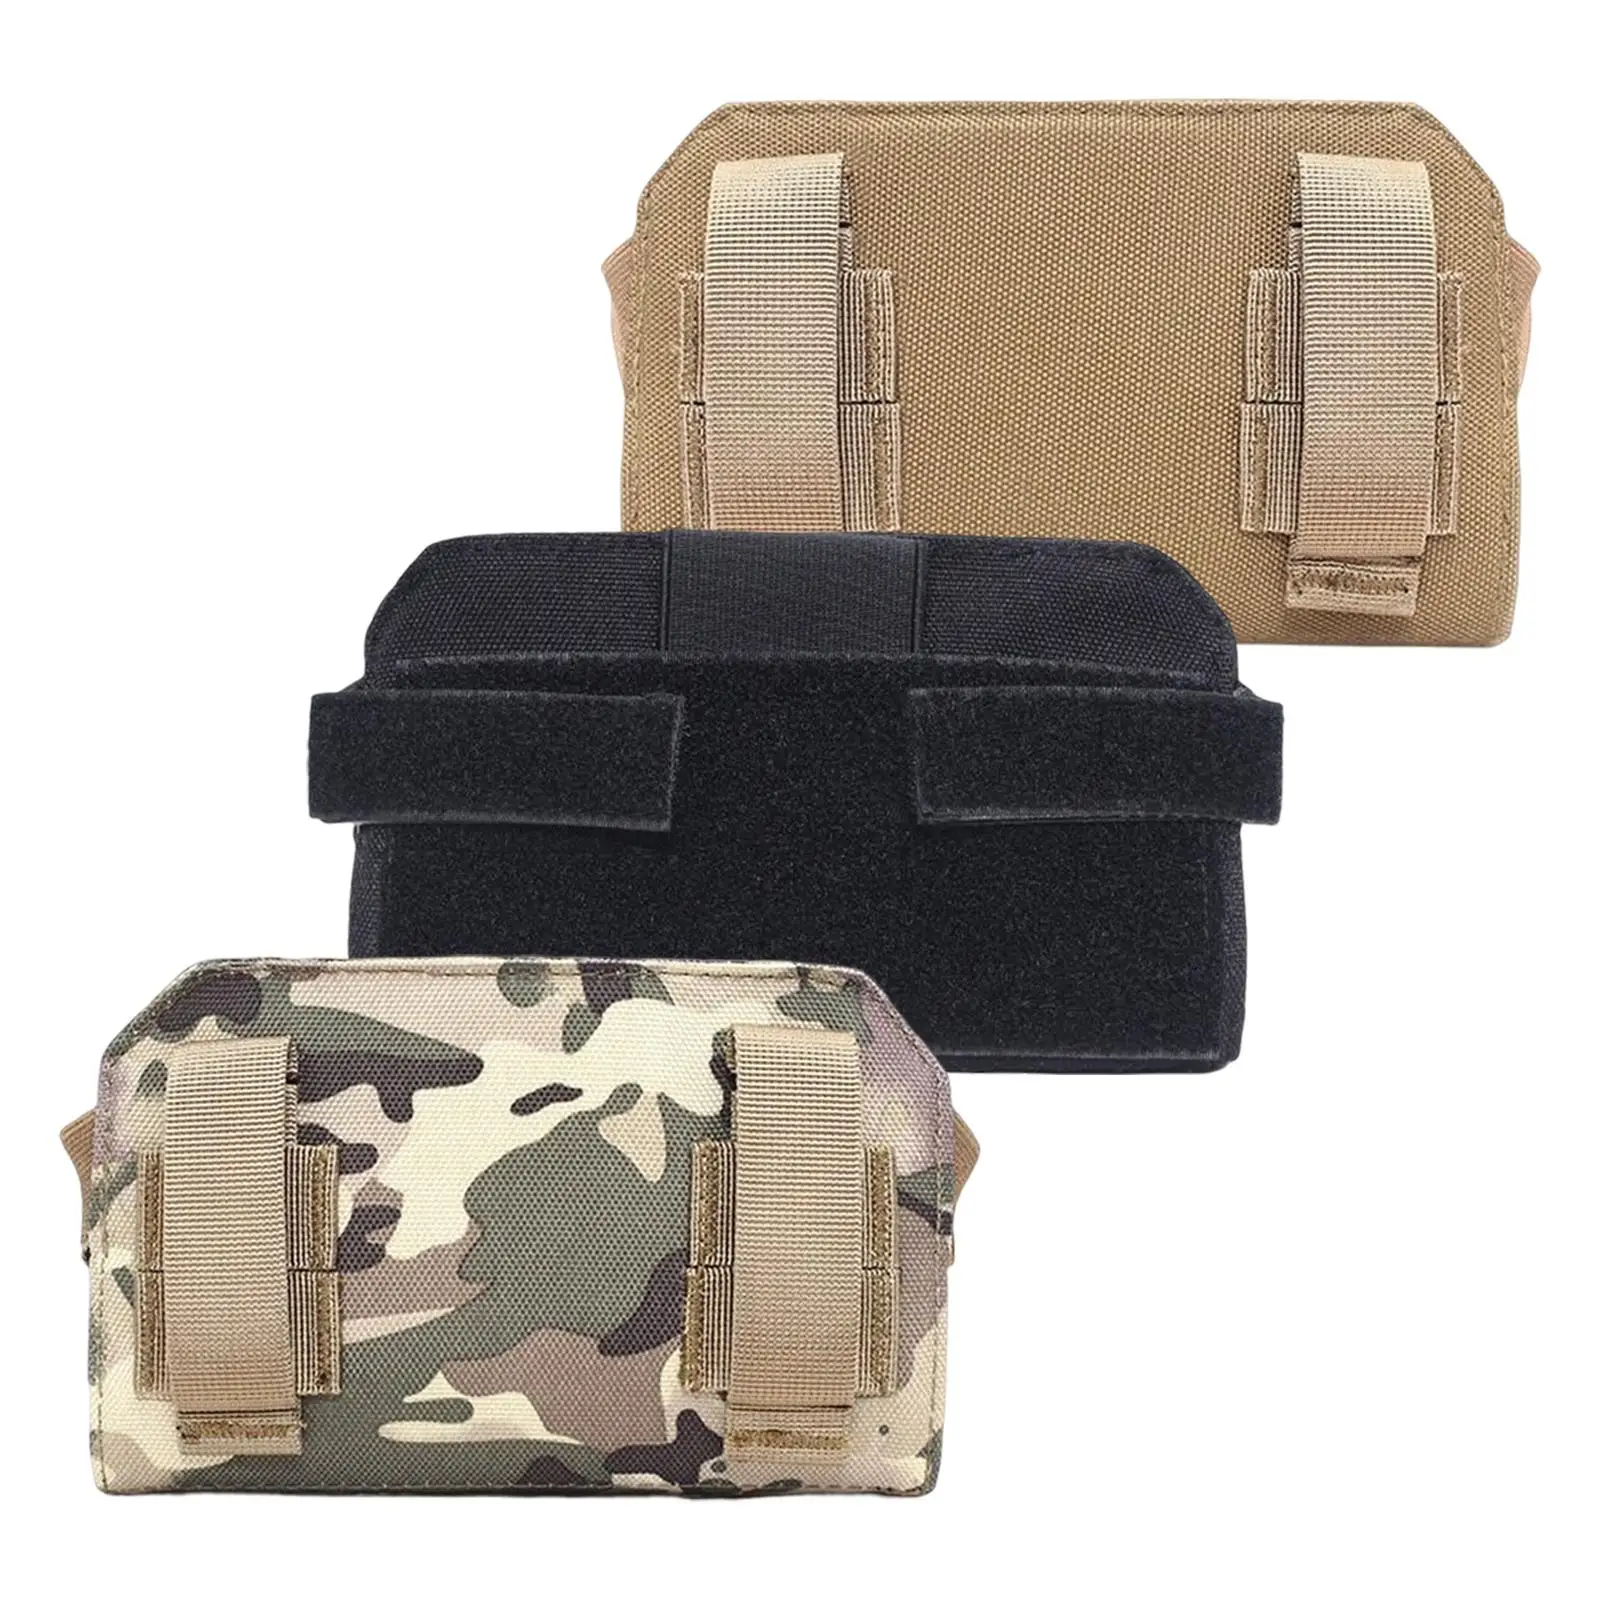 Molle Map Bag Organizer Molle Pouch Multifunctional Quick Release Military Map Bag Military Admin Pouch for Hunting Shooting